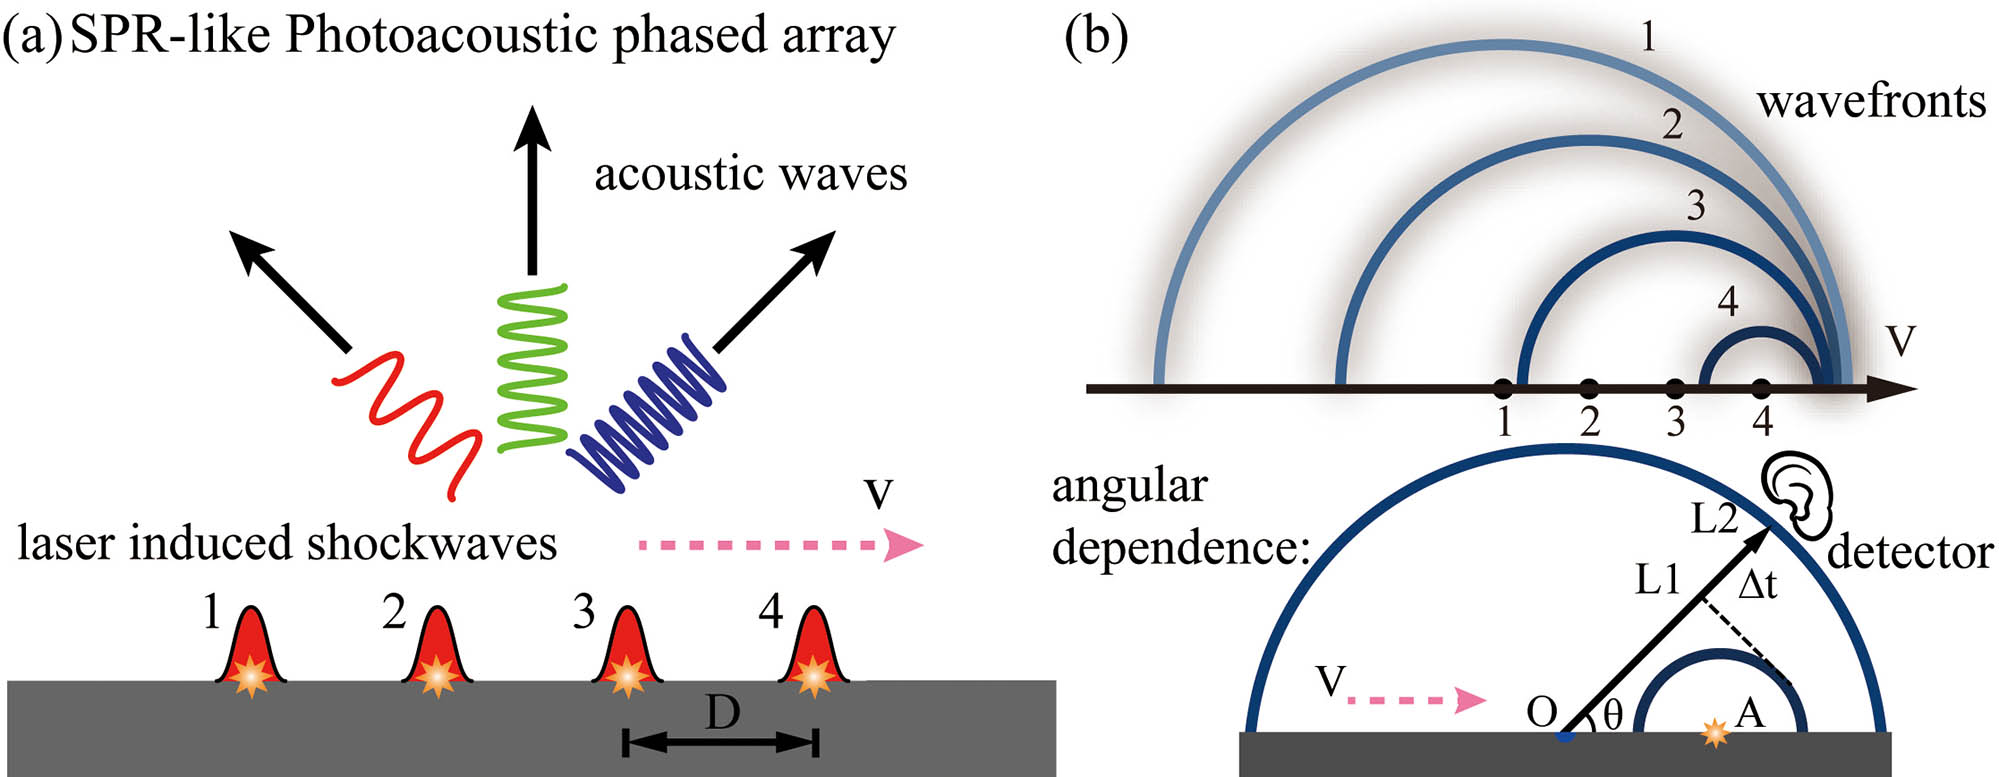 Schematic of SPR-like photoacoustic phased array in a degraded form. (a) SPR-like photoacoustic phased array in a degraded form; the sequentially (1→4) excited laser-shock array emits acoustic radiation into the far field. (b) Upper, the resultant multiple propagating wavefronts from the procedure in (a); integers 1→4 denote each source and every wavefront in time sequence (indicated by the color). Lower, the effective quasi-phase line (dashed, normal to OL1 and OL2) depicts the angle dependence in the broadband SPR-like pattern in (b). By the moment when the detector captures the first shock front (blue) from source O, the secondary shock front from source A propagates to the detector. The delay time (Δt) for the detector to catch the later shock wave varies with the detection angle; accordingly, the received frequency is also changed.